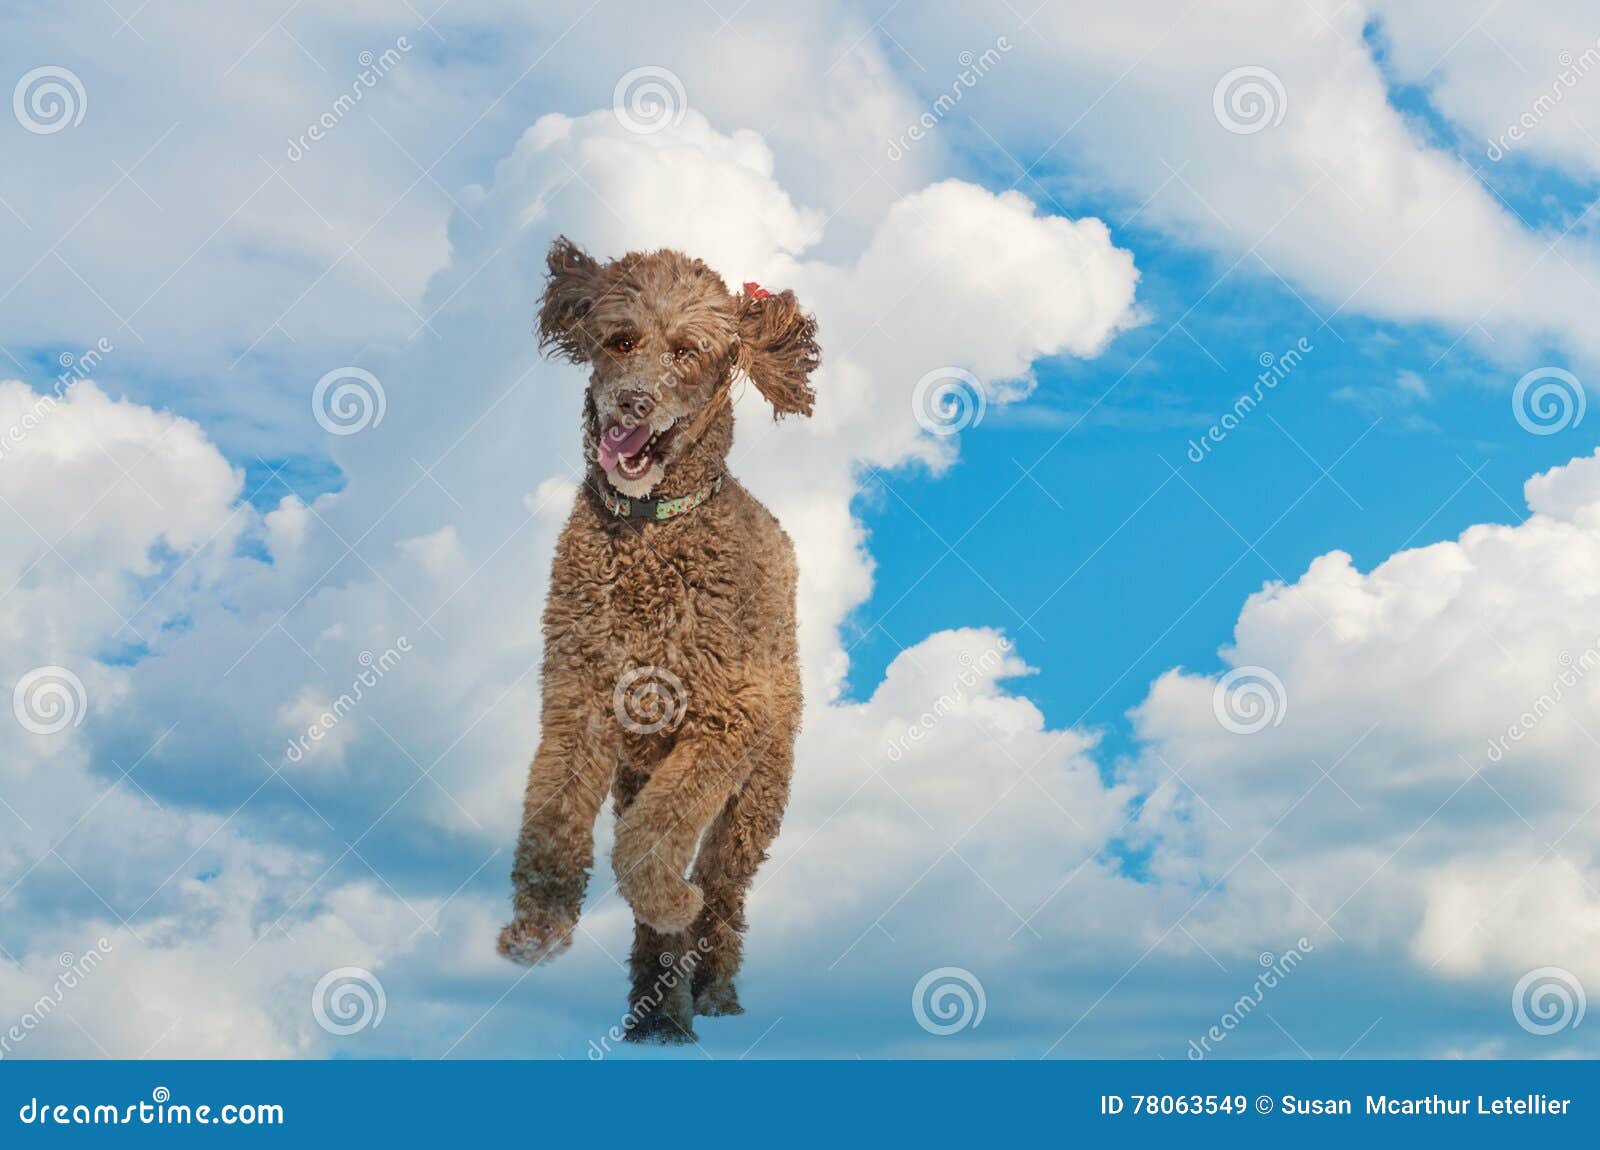 what are sky dogs